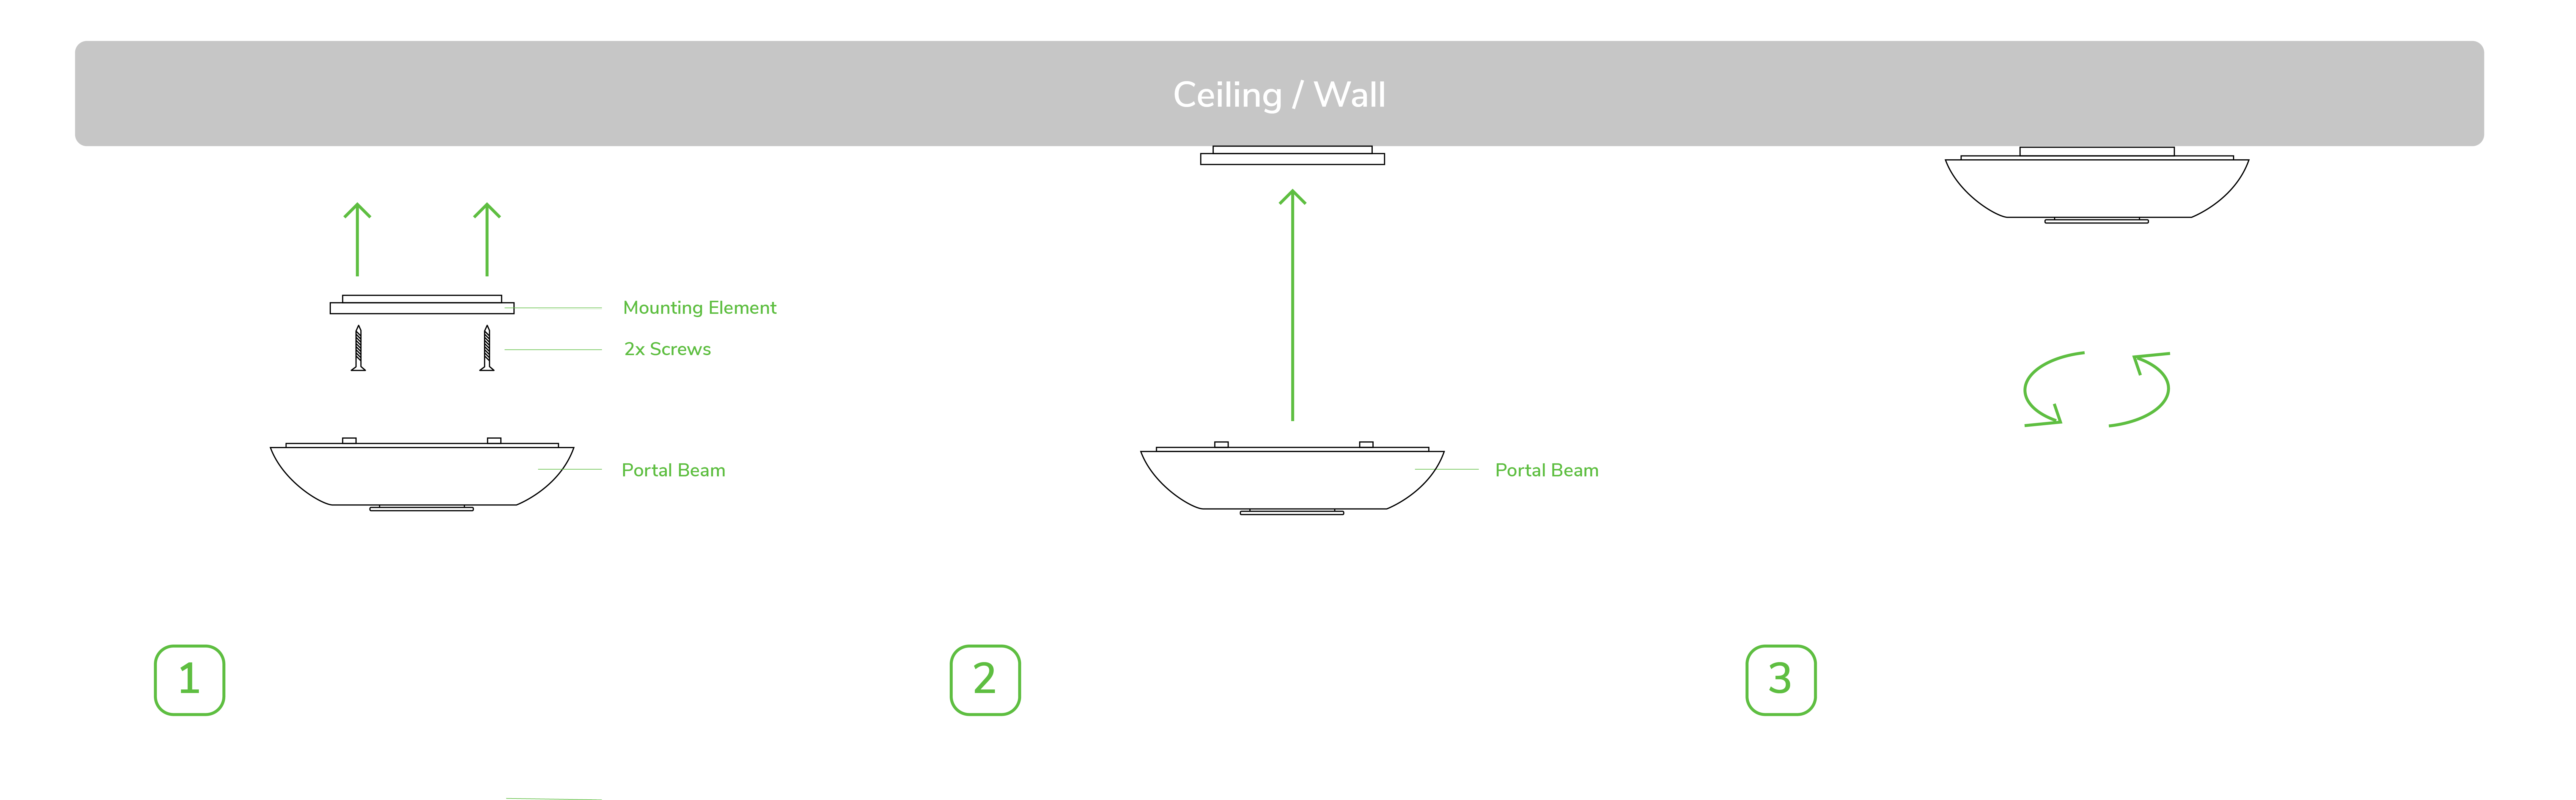 plate-mount-ceiling.png